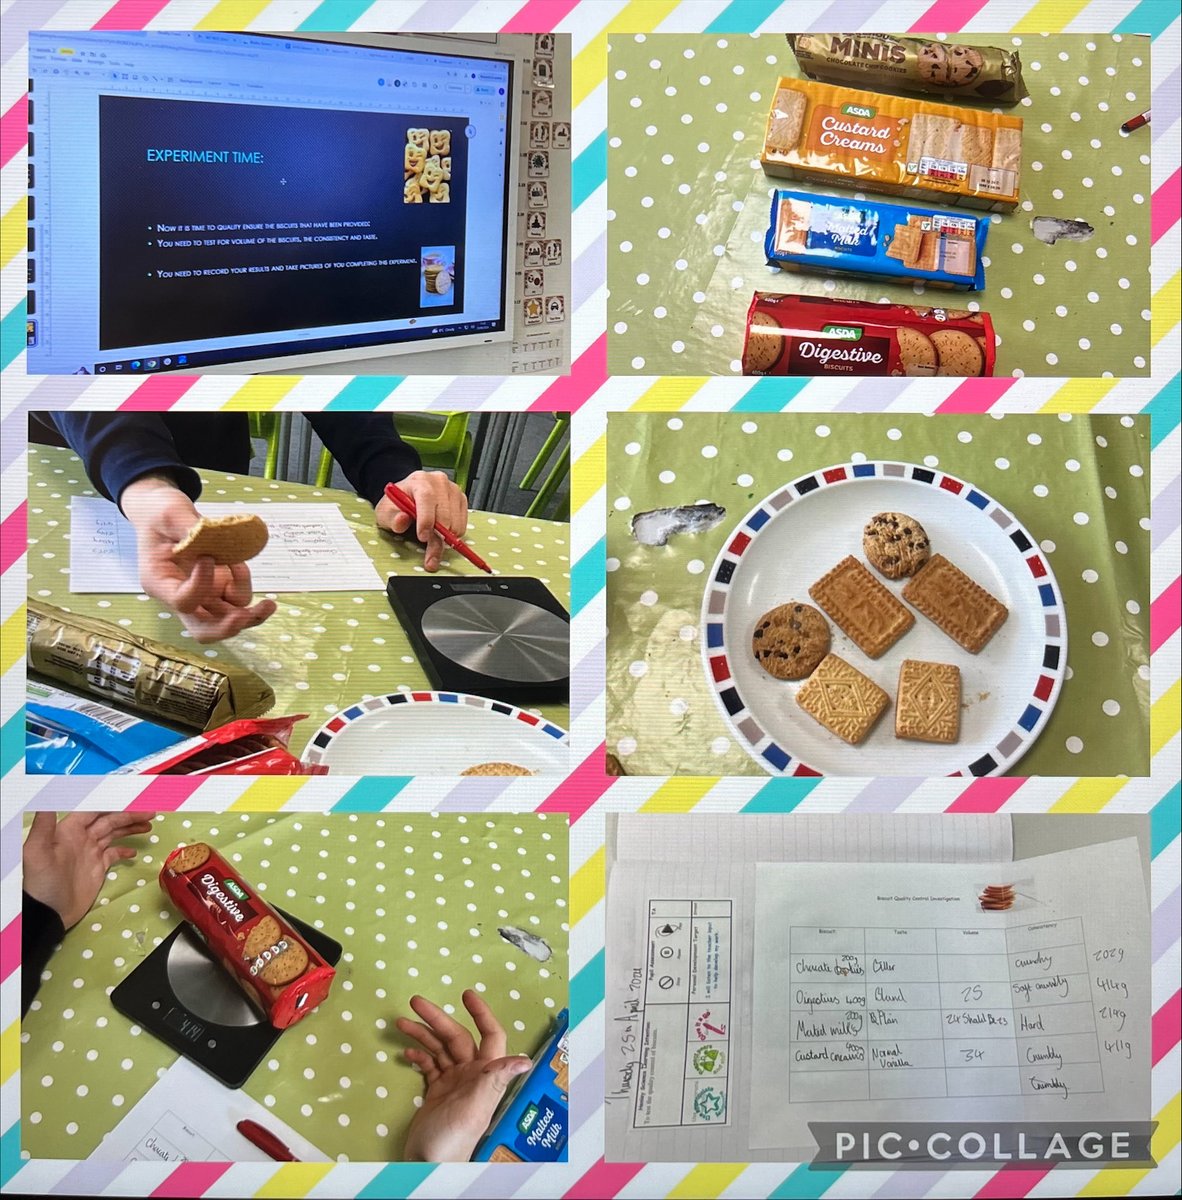 Today S1 enjoyed investigating the quality control of different biscuits as part of their science unit! They considered the volume, weight, taste and consistency.  #handsonlearning